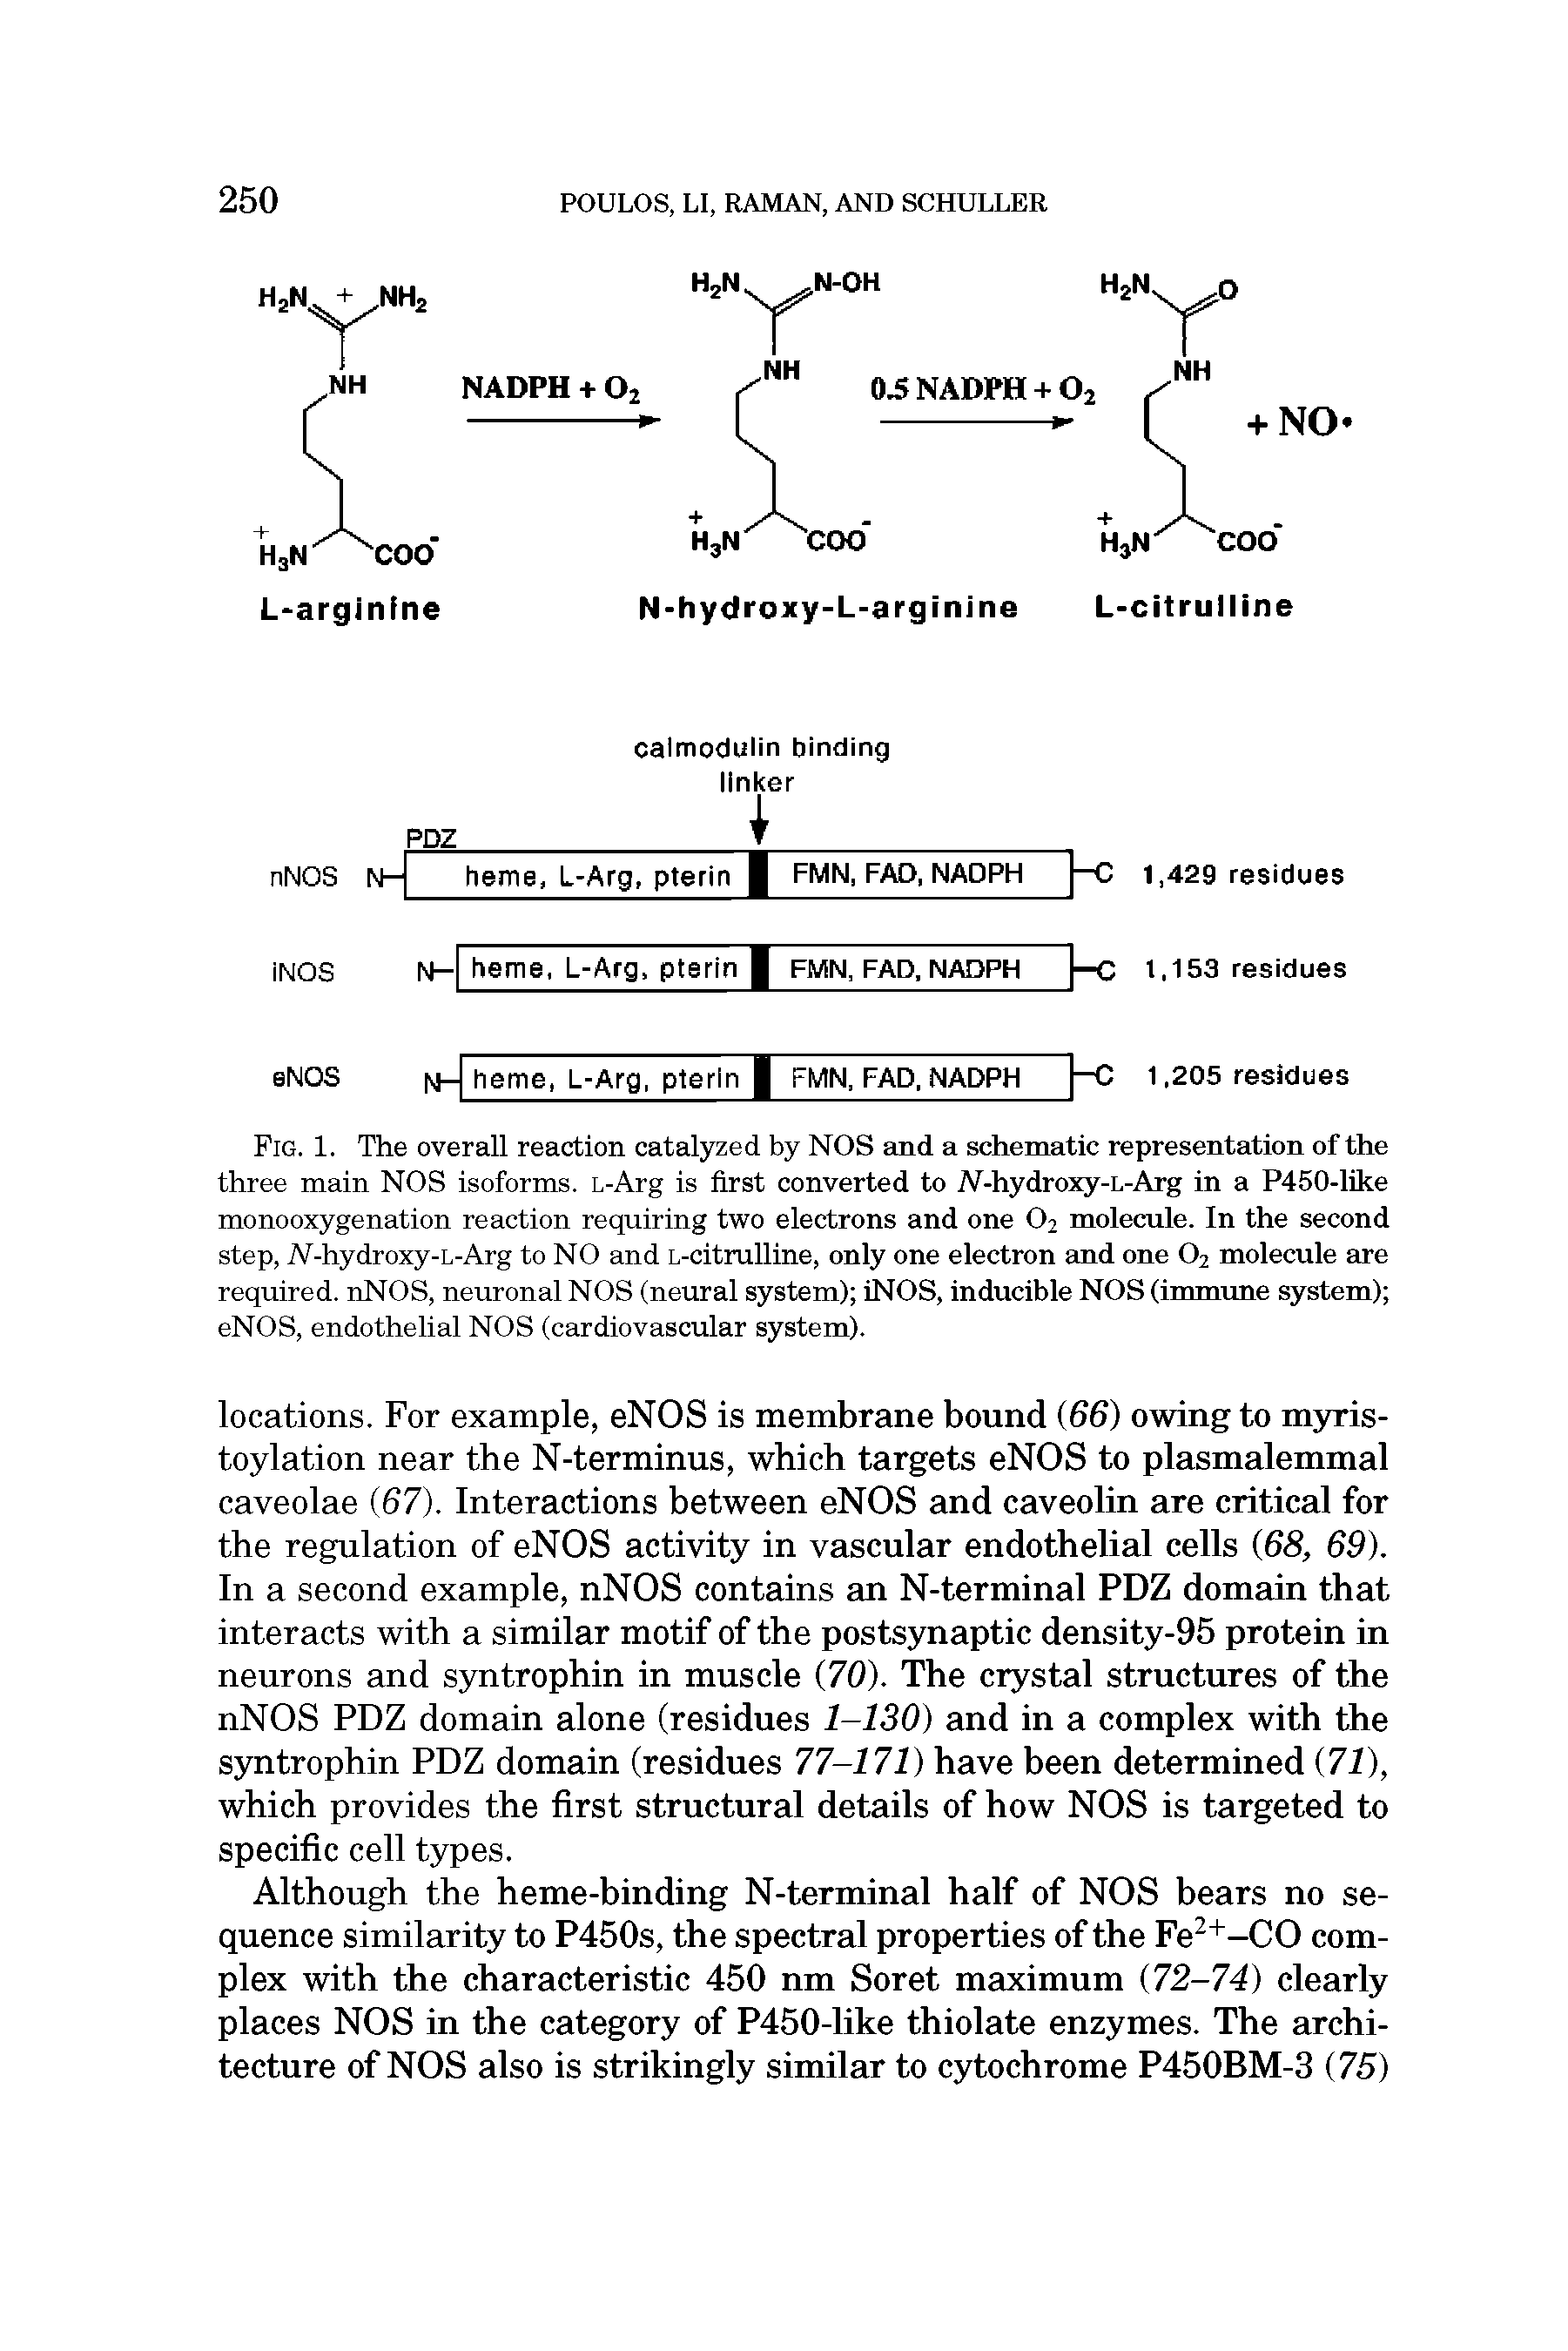 Fig. 1. The overall reaction catalyzed by NOS and a schematic representation of the three main NOS isoforms. L-Arg is first converted to JV-hydroxy-L-Arg in a P450-like monooxygenation reaction requiring two electrons and one O2 molecule. In the second step, Ai-hydroxy-L-Arg to NO and L-citrulline, only one electron and one O2 molecule are required. nNOS, neuronal NOS (neural system) iNOS, inducible NOS (immune system) eNOS, endothelial NOS (cardiovascular system).